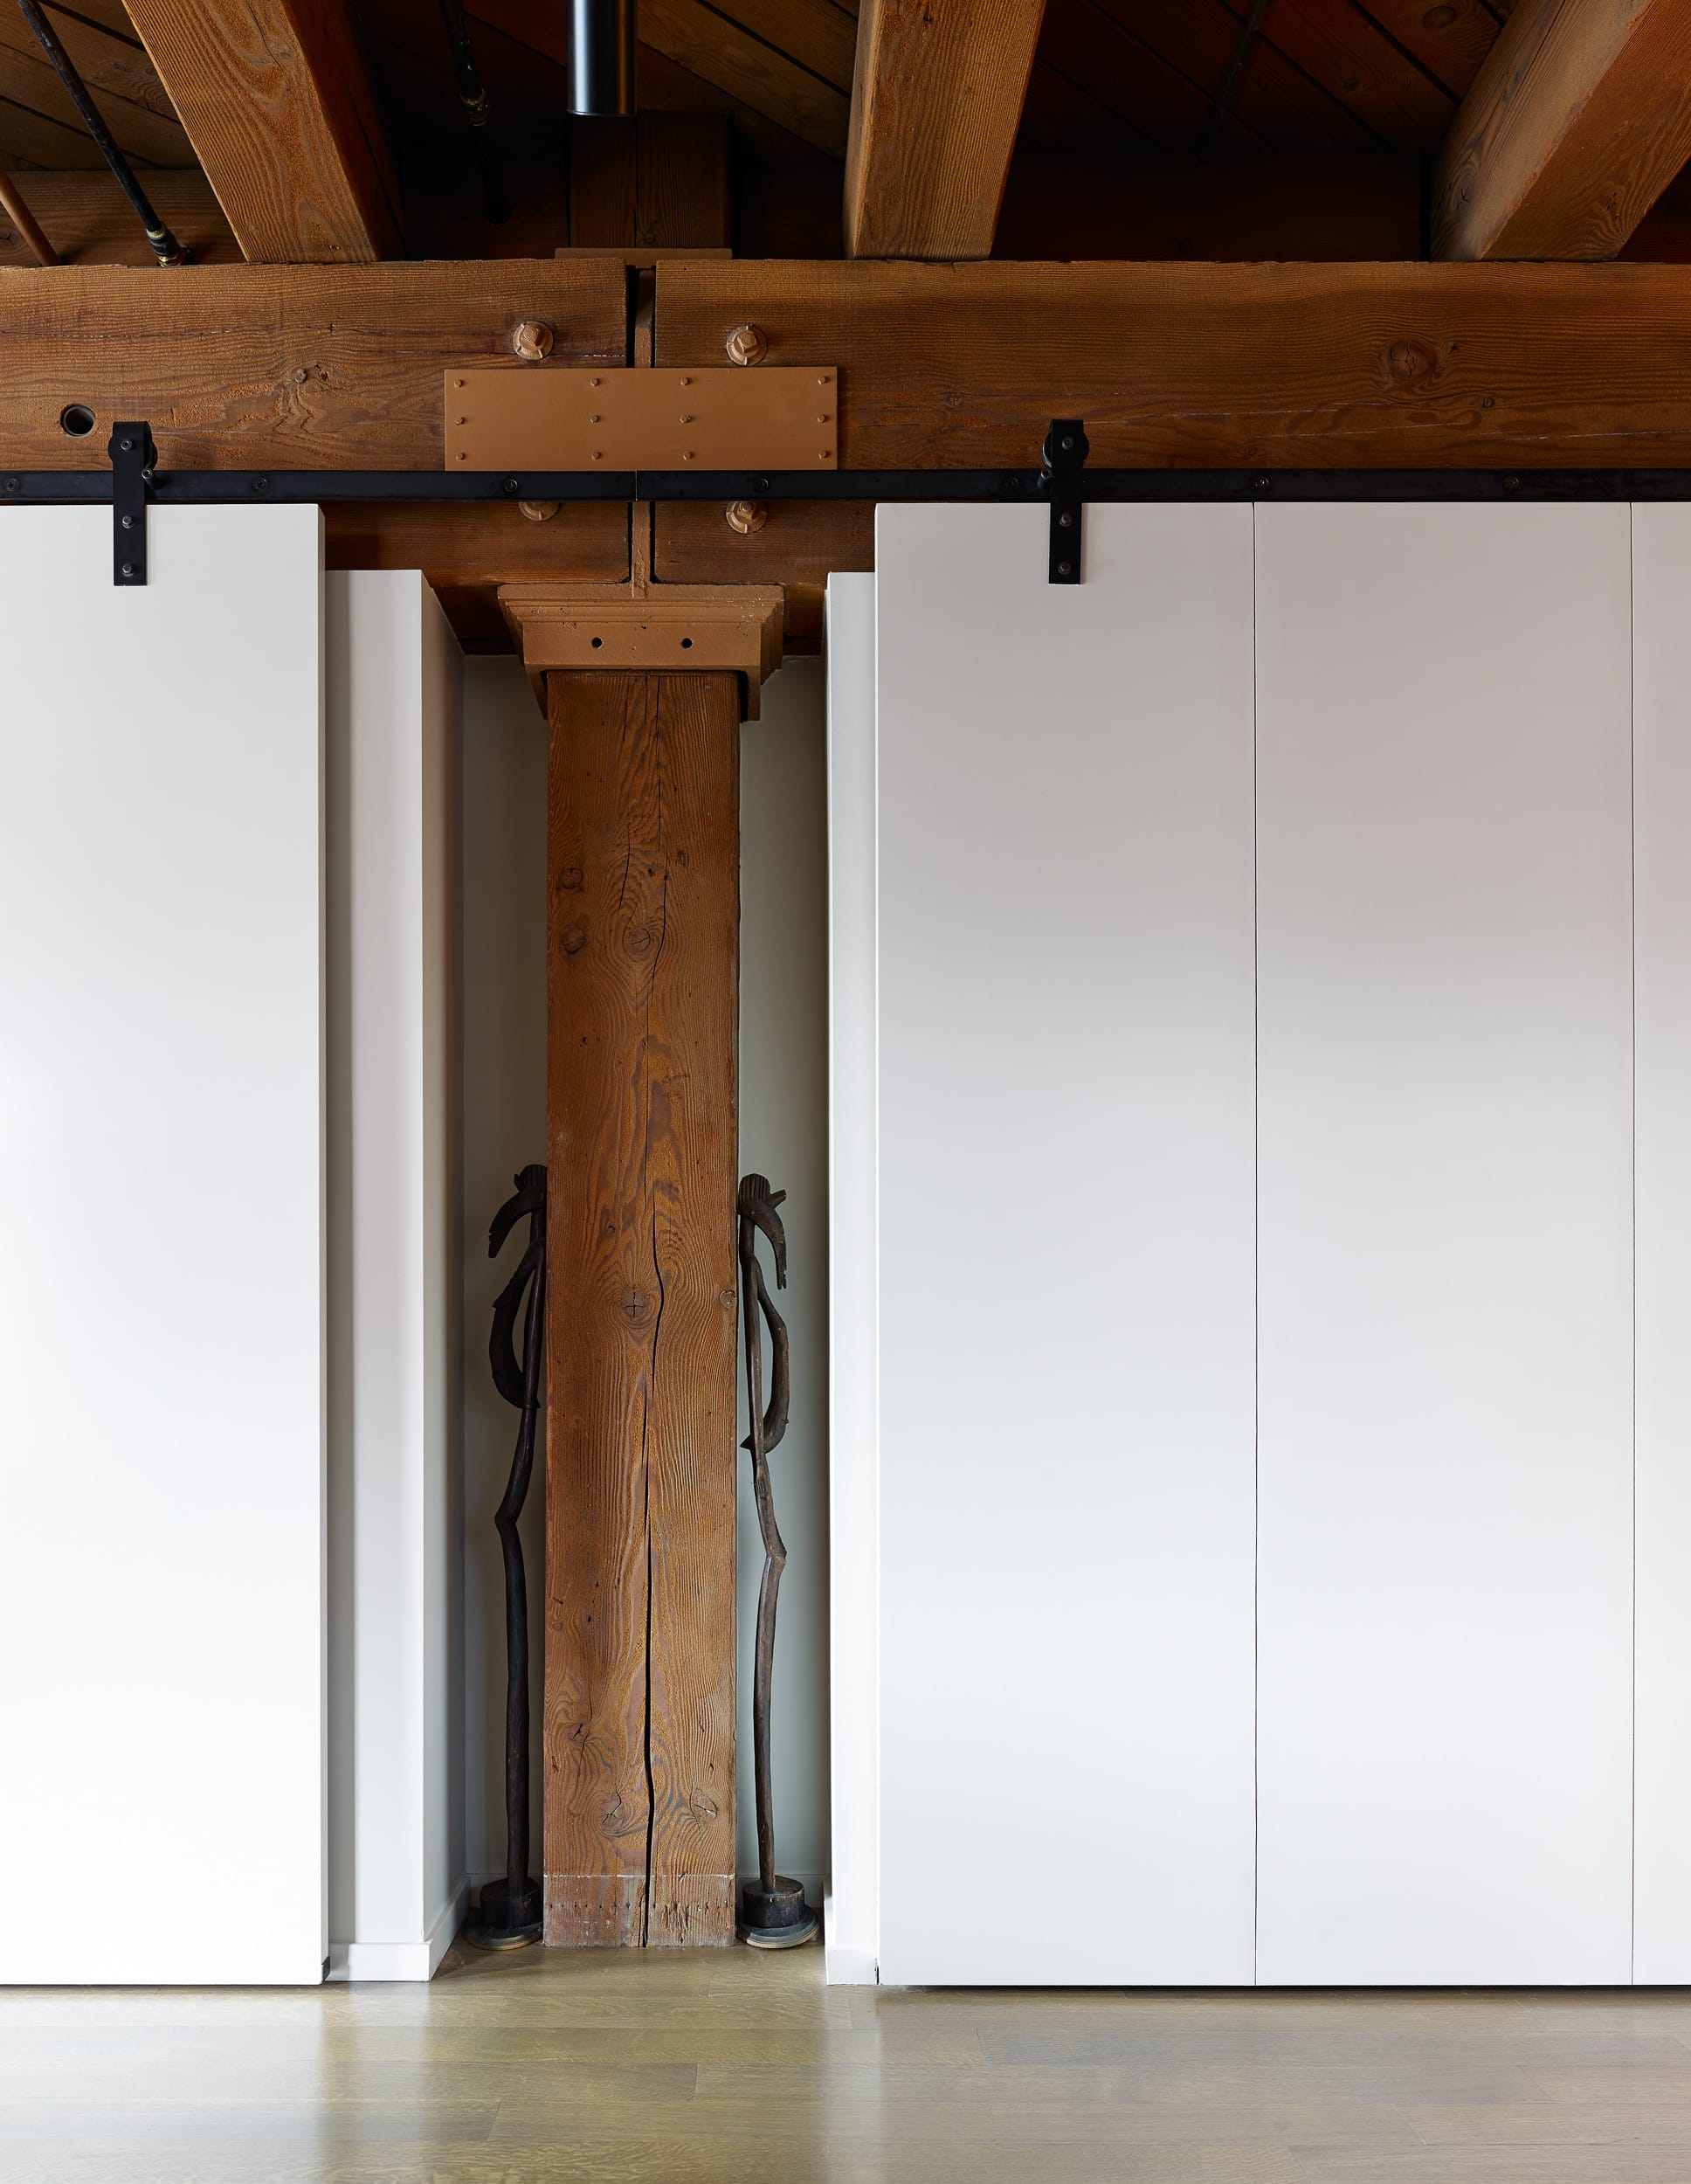 A white sliding door in a room with wooden beams.